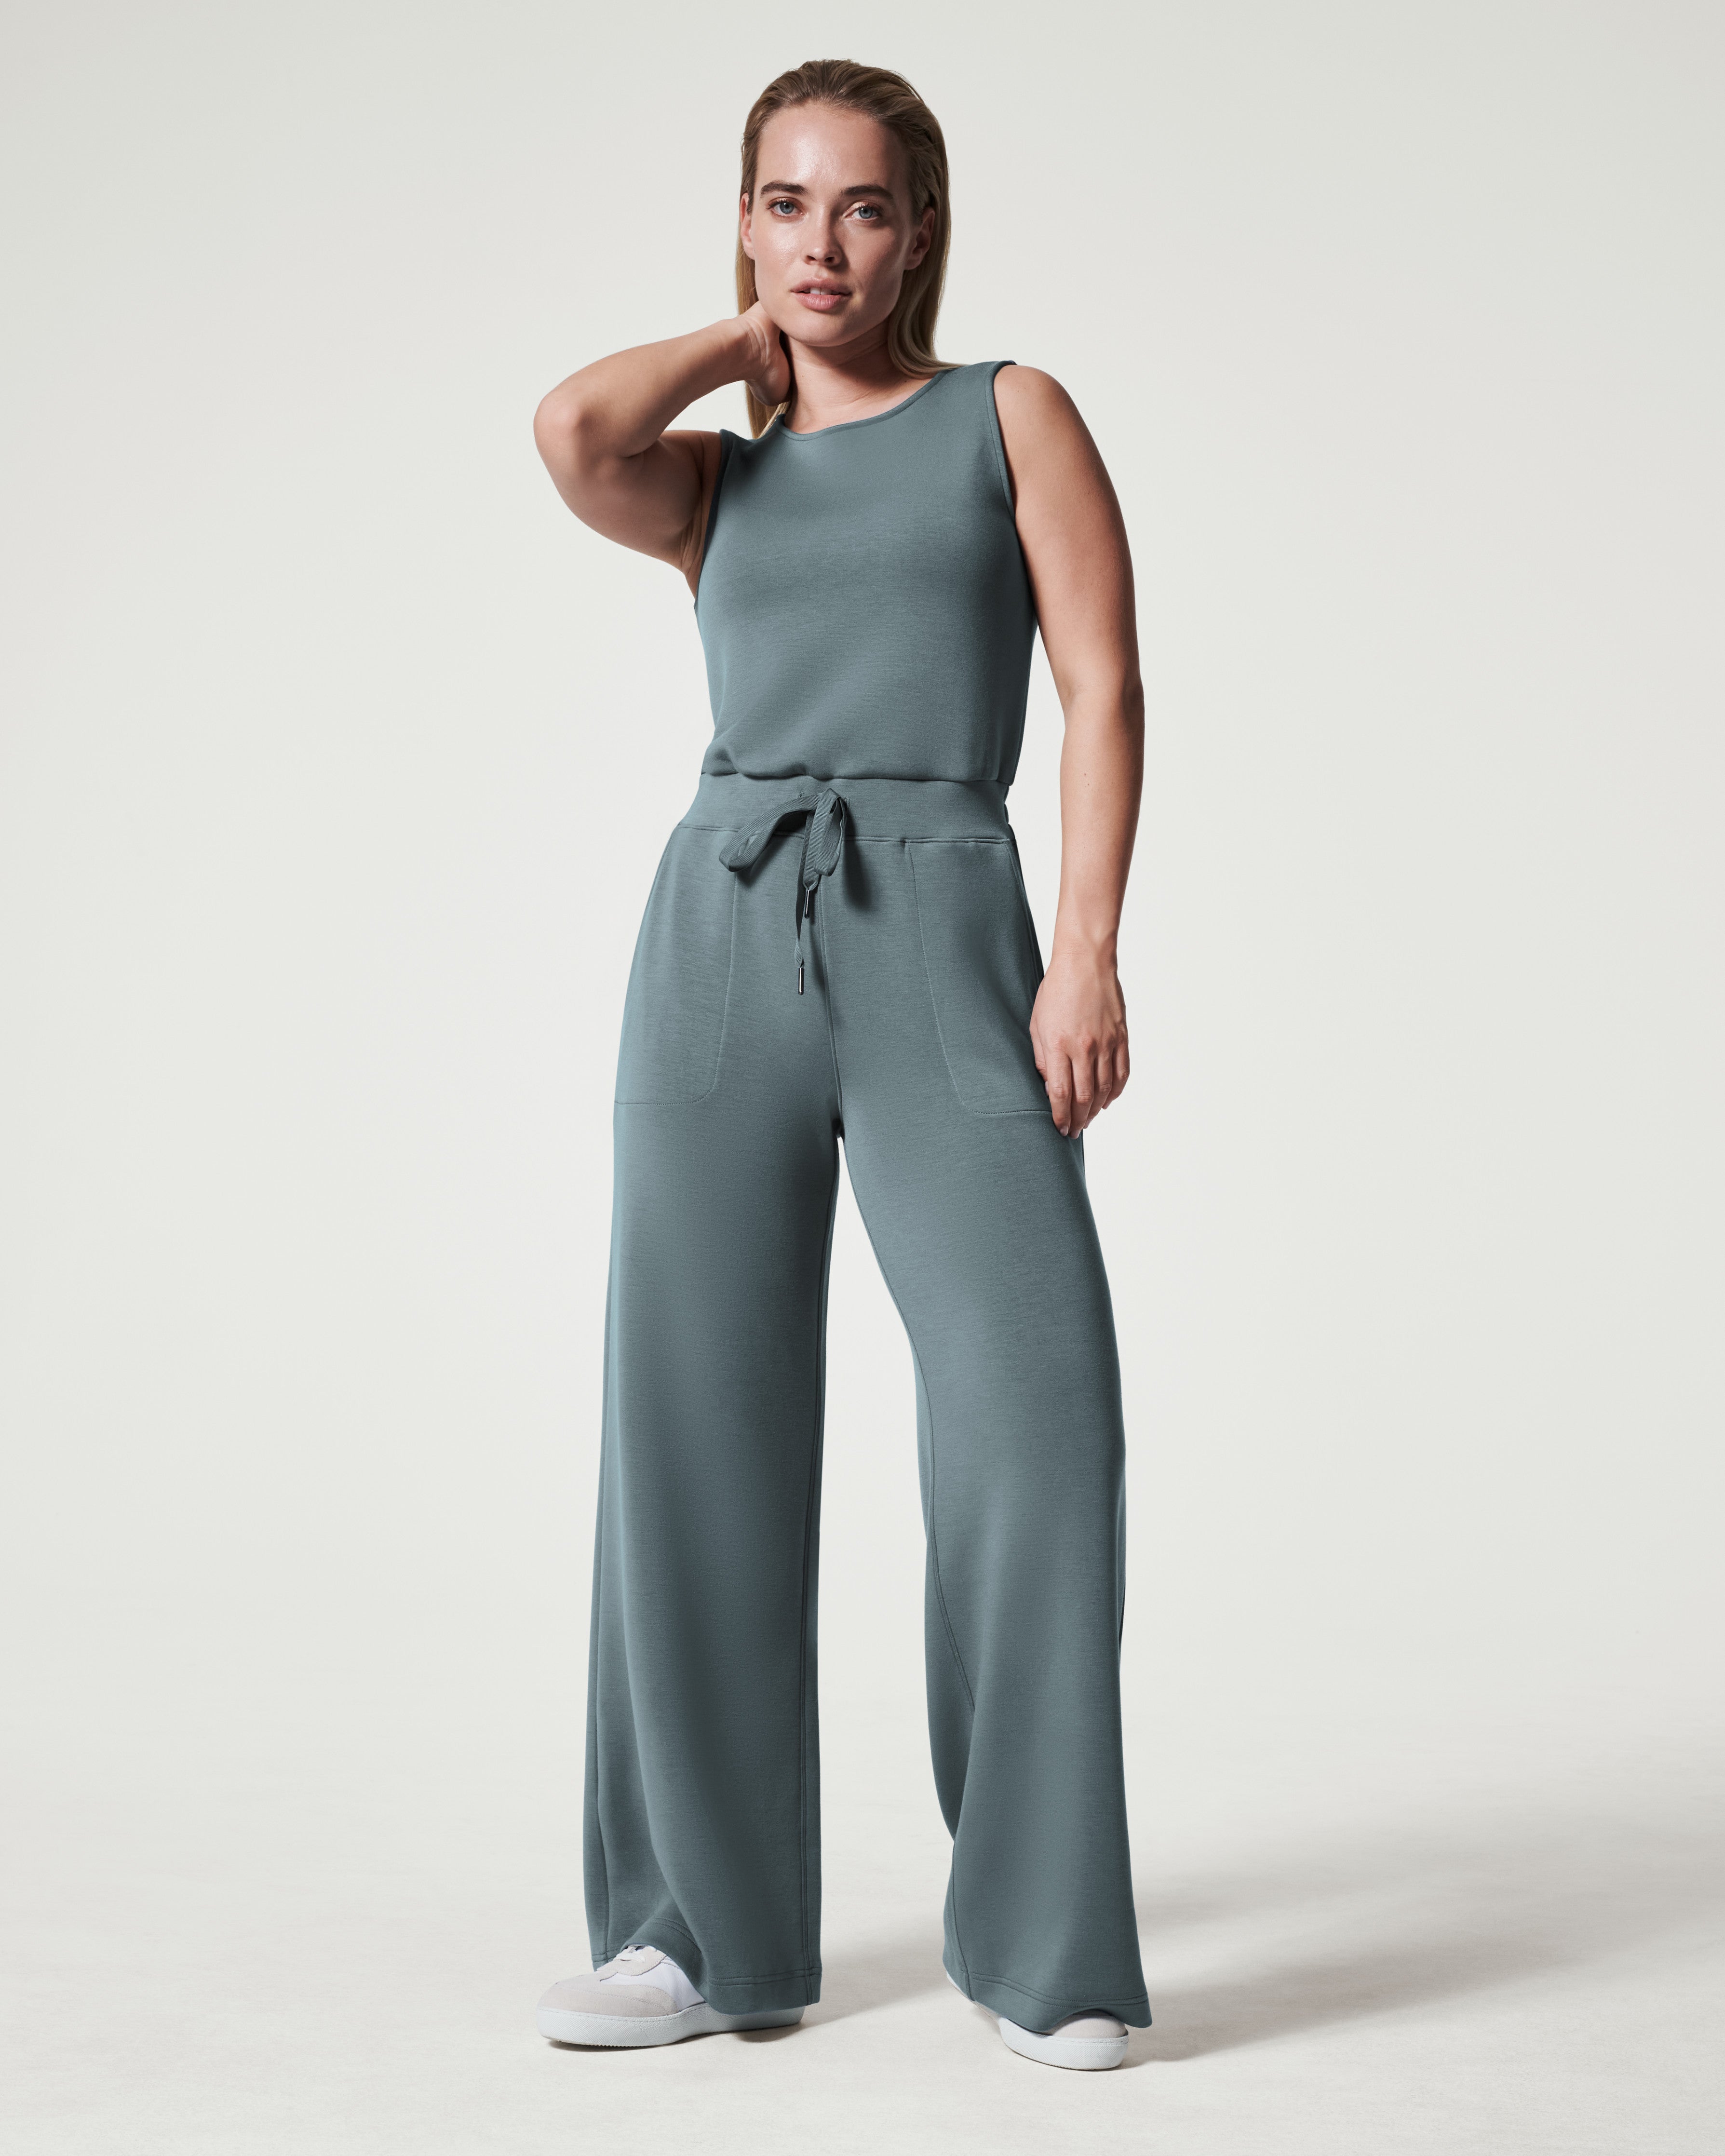 AirEssentials Sleeveless Jumpsuit for |